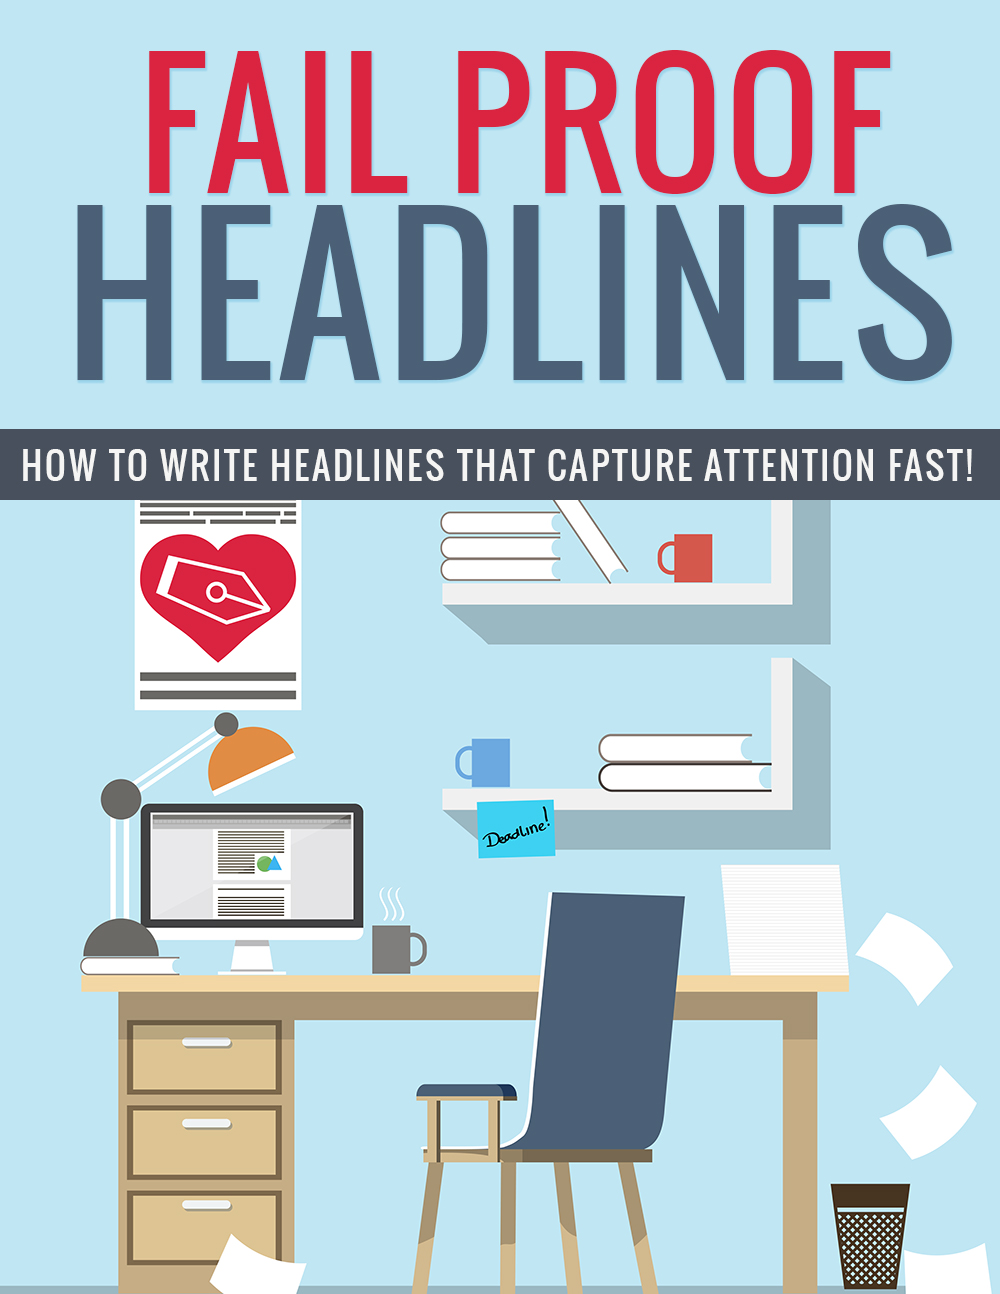 Fail Proof Headlines that attracts attention fast!